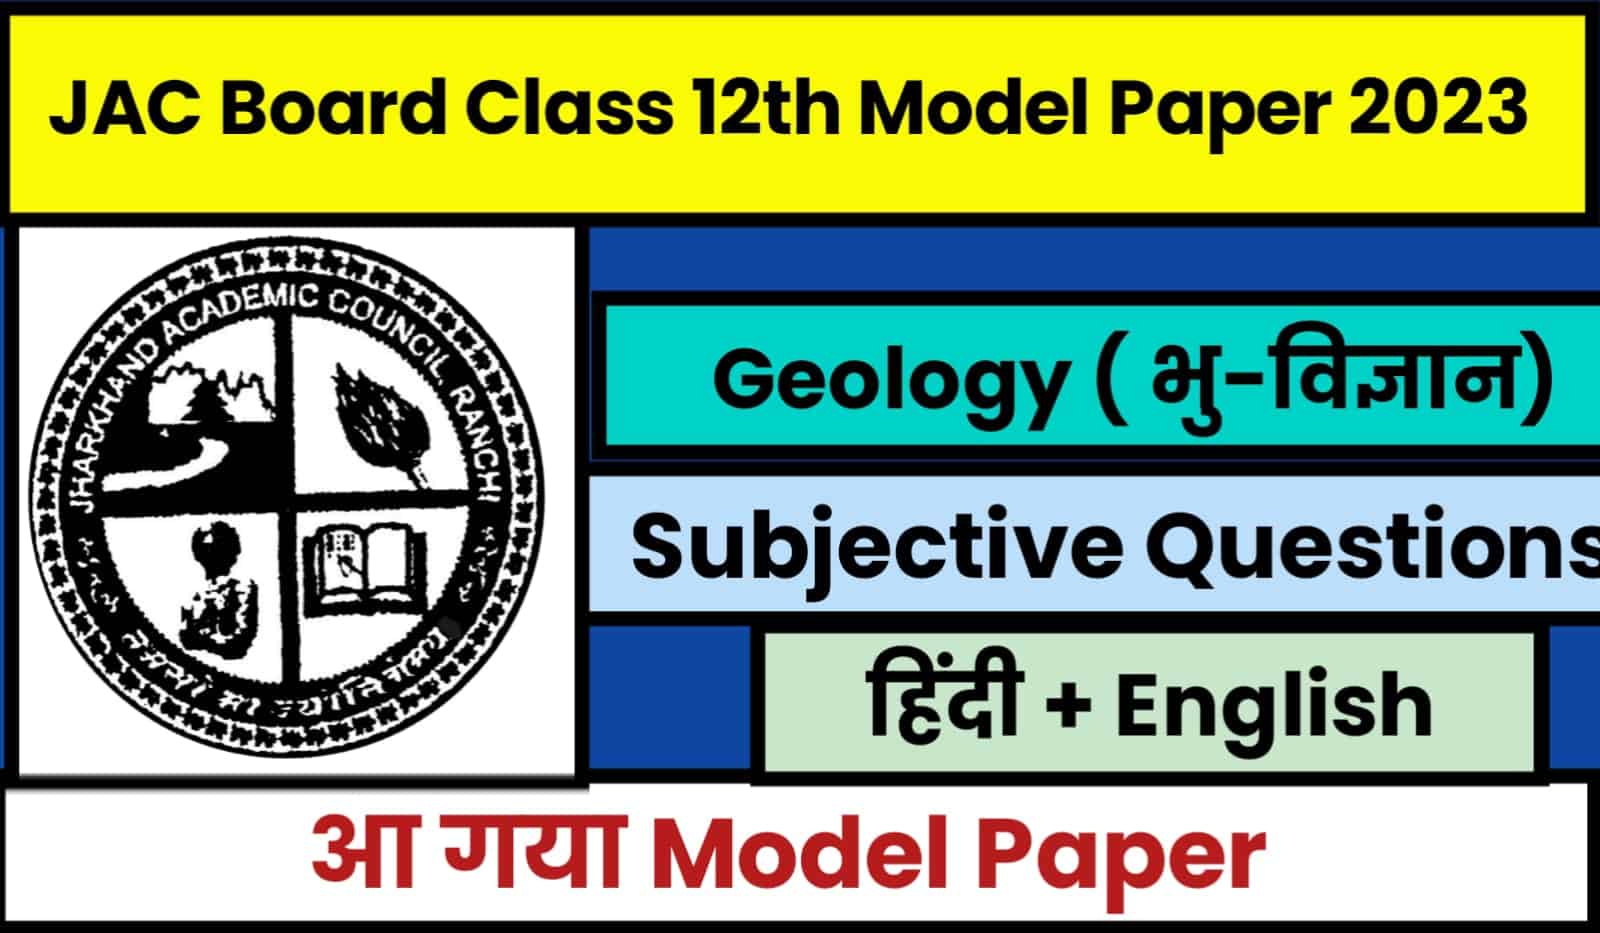 JAC 12th Geology Model Paper Subjective